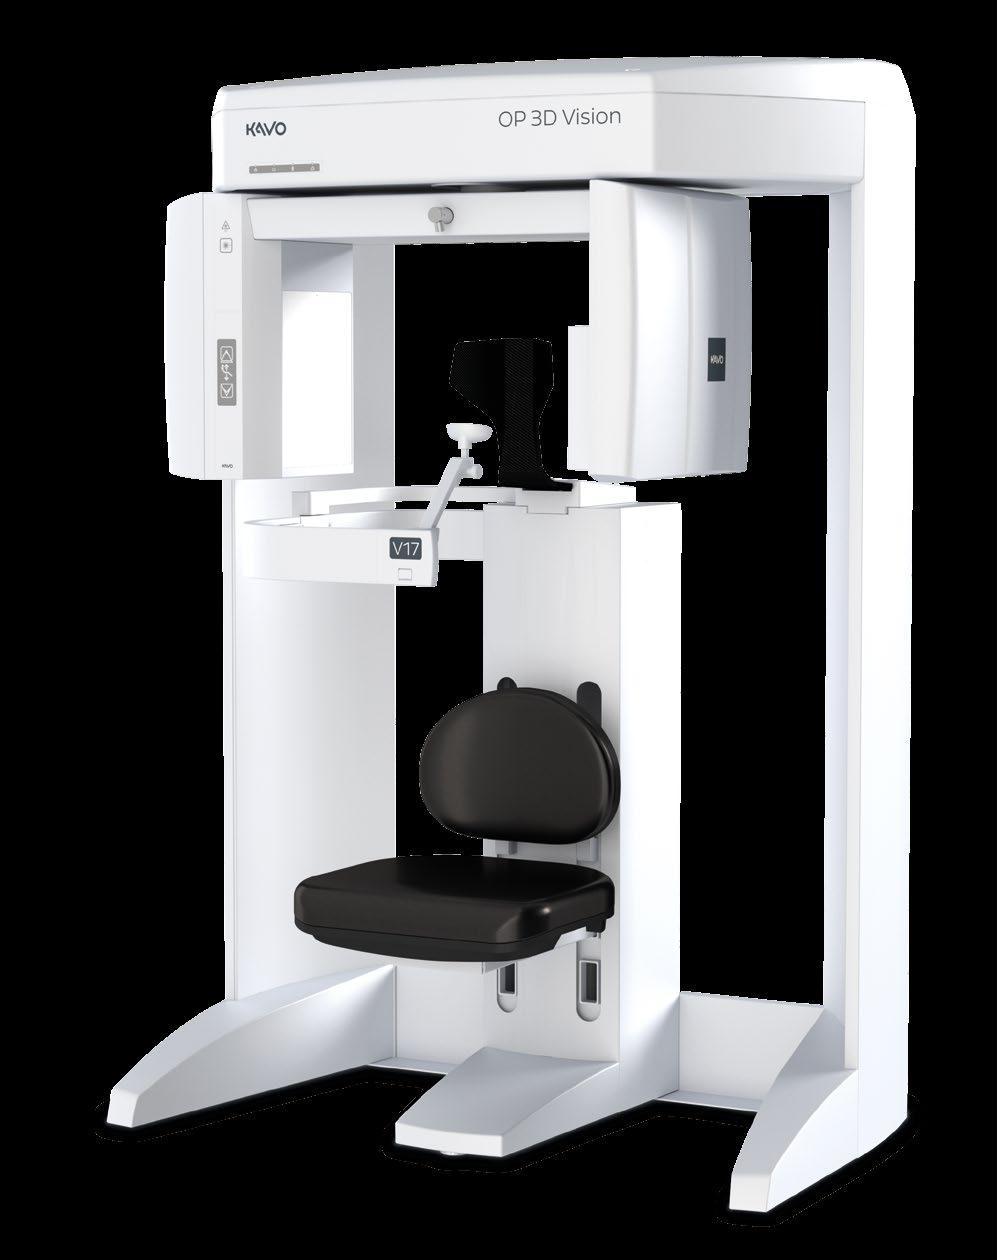 The solution for every task: KaVo OP 3D Vision. Regardless of which dental query you may have, the KaVo ORTHOPANTOMOGRAPH OP 3D Vision X-ray system is the answer.